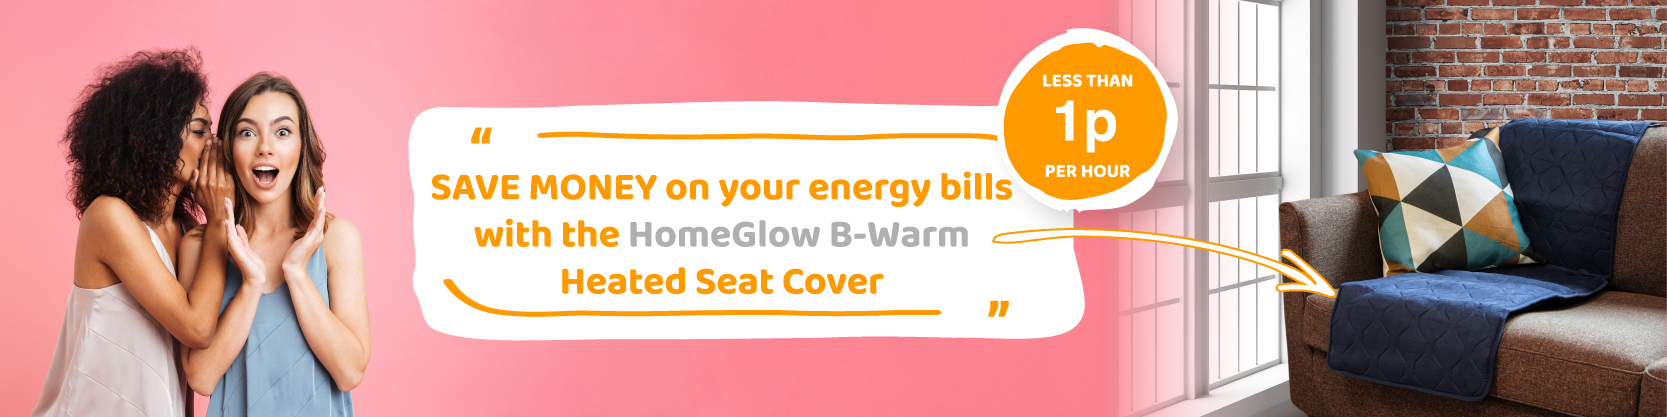 HomeGlow B-Warm Heated Seat Cover